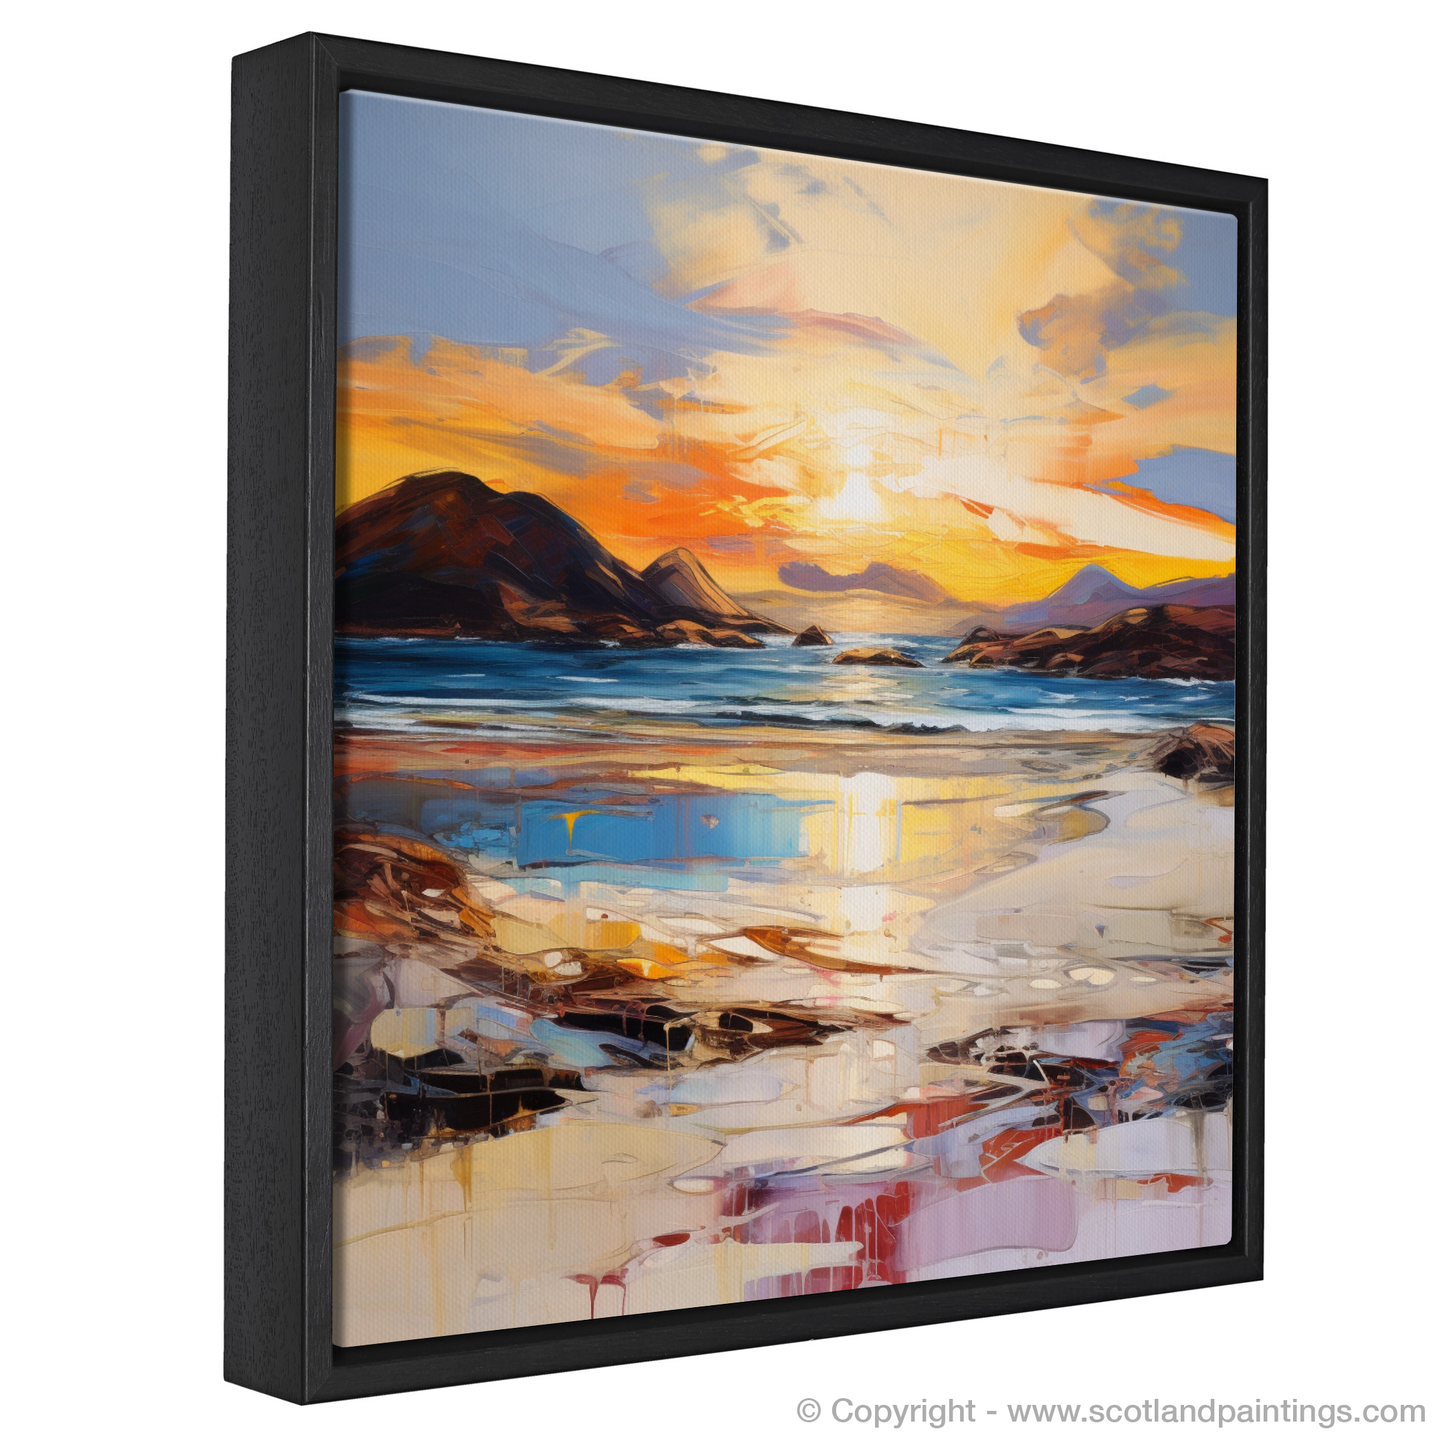 Painting and Art Print of Traigh Mhor at sunset entitled "Sunset Embrace at Traigh Mhor".